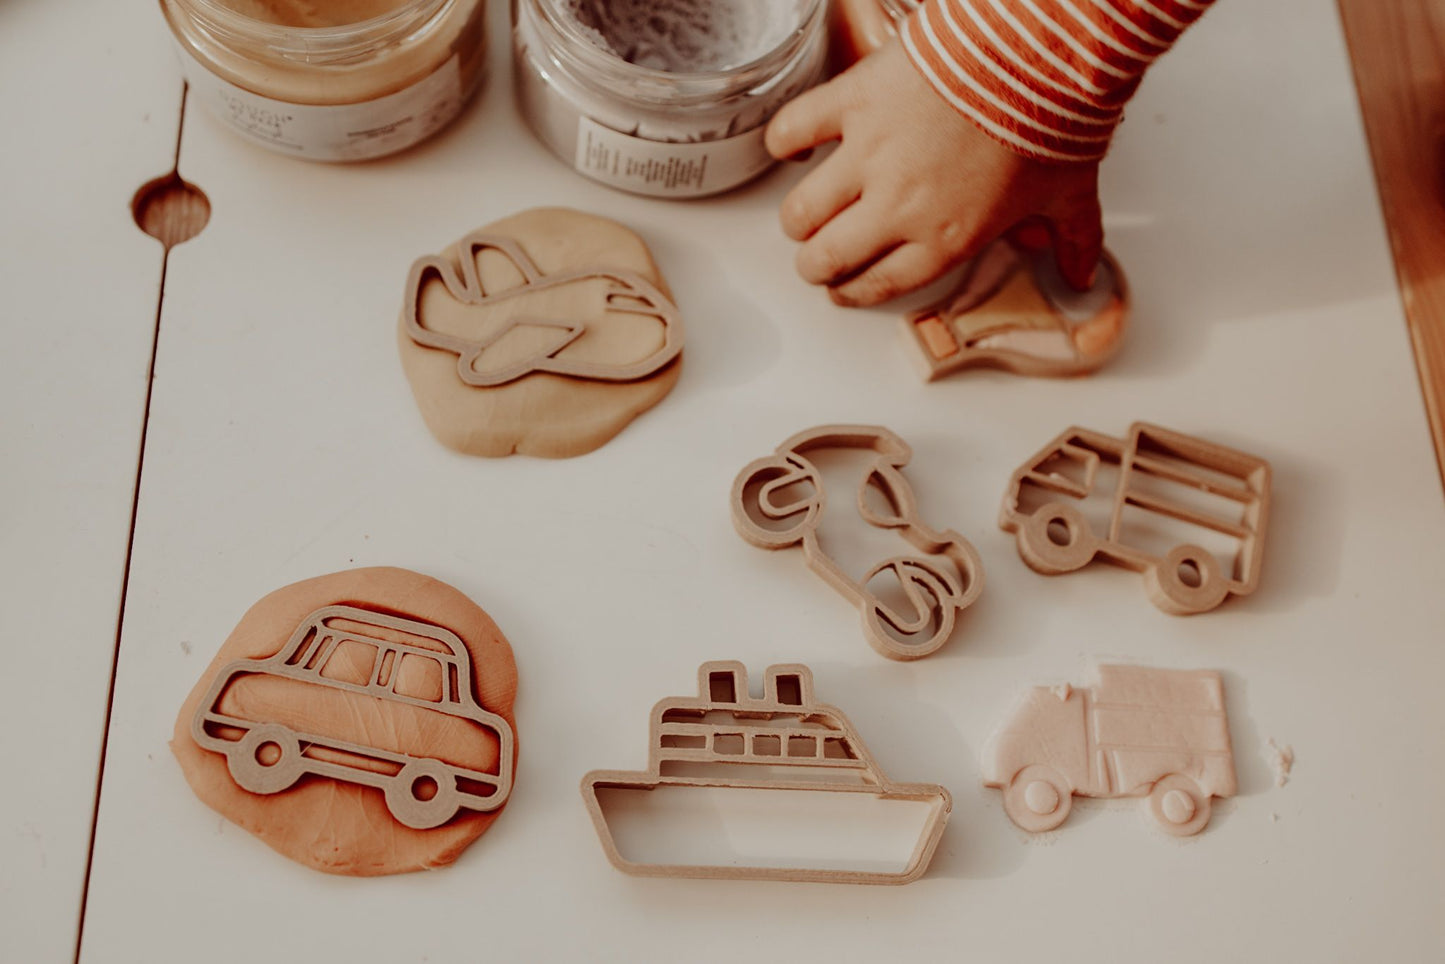 Kinfolk Pantry eco playdough cutters - a set of 6 transport themed biodegradable cutters for kids arts and crafts. Image shows a toddler using the cutters to make playdough shapes of the boat, plane, car, hot air balloon, motorbike and truck.